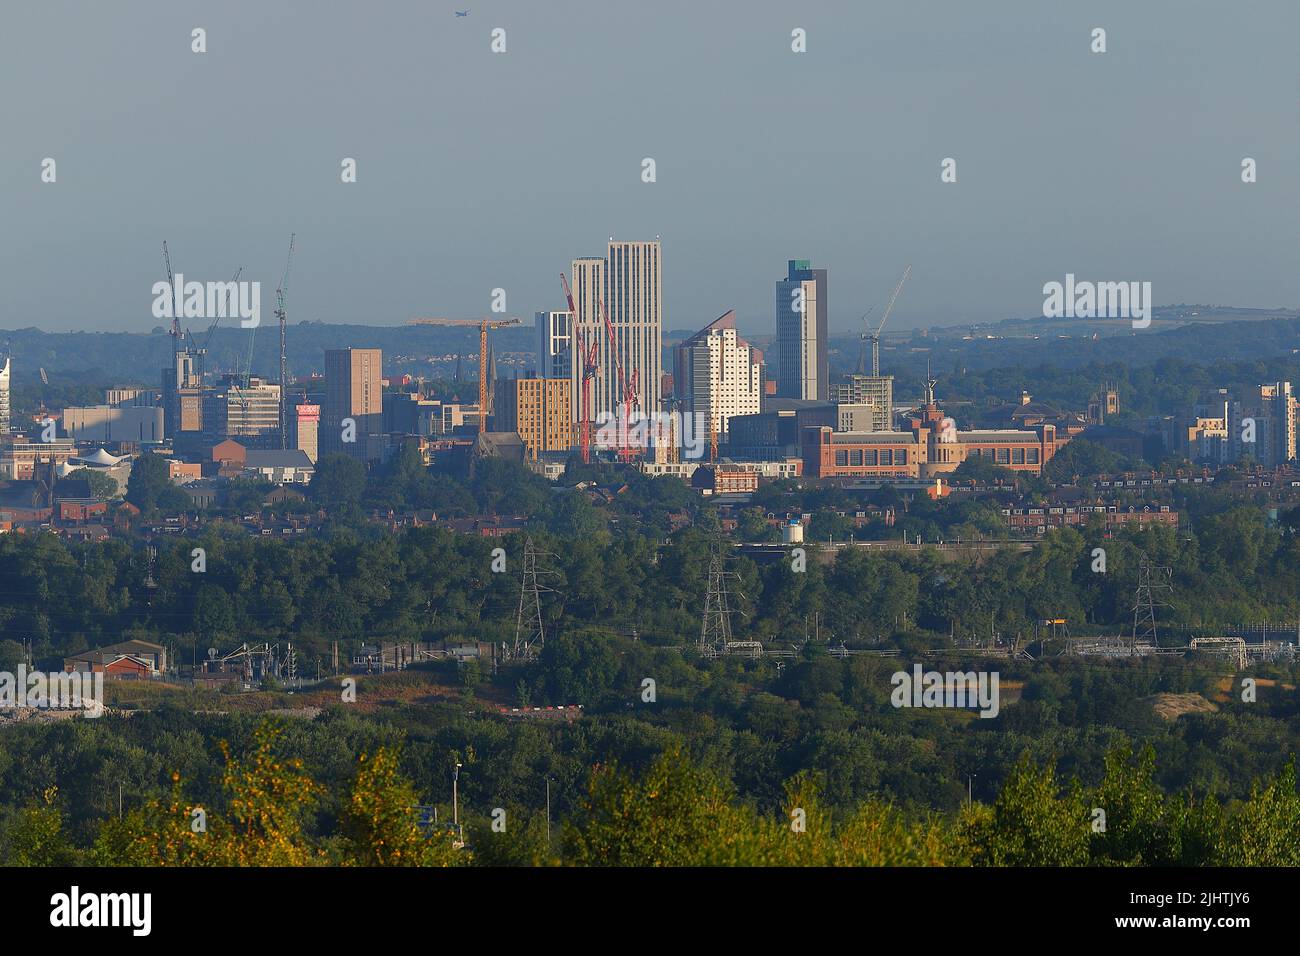 A view of Leeds City Skyline from Rothwell. Leeds Bradford Airport can just be seen on the horizon top right. Stock Photo